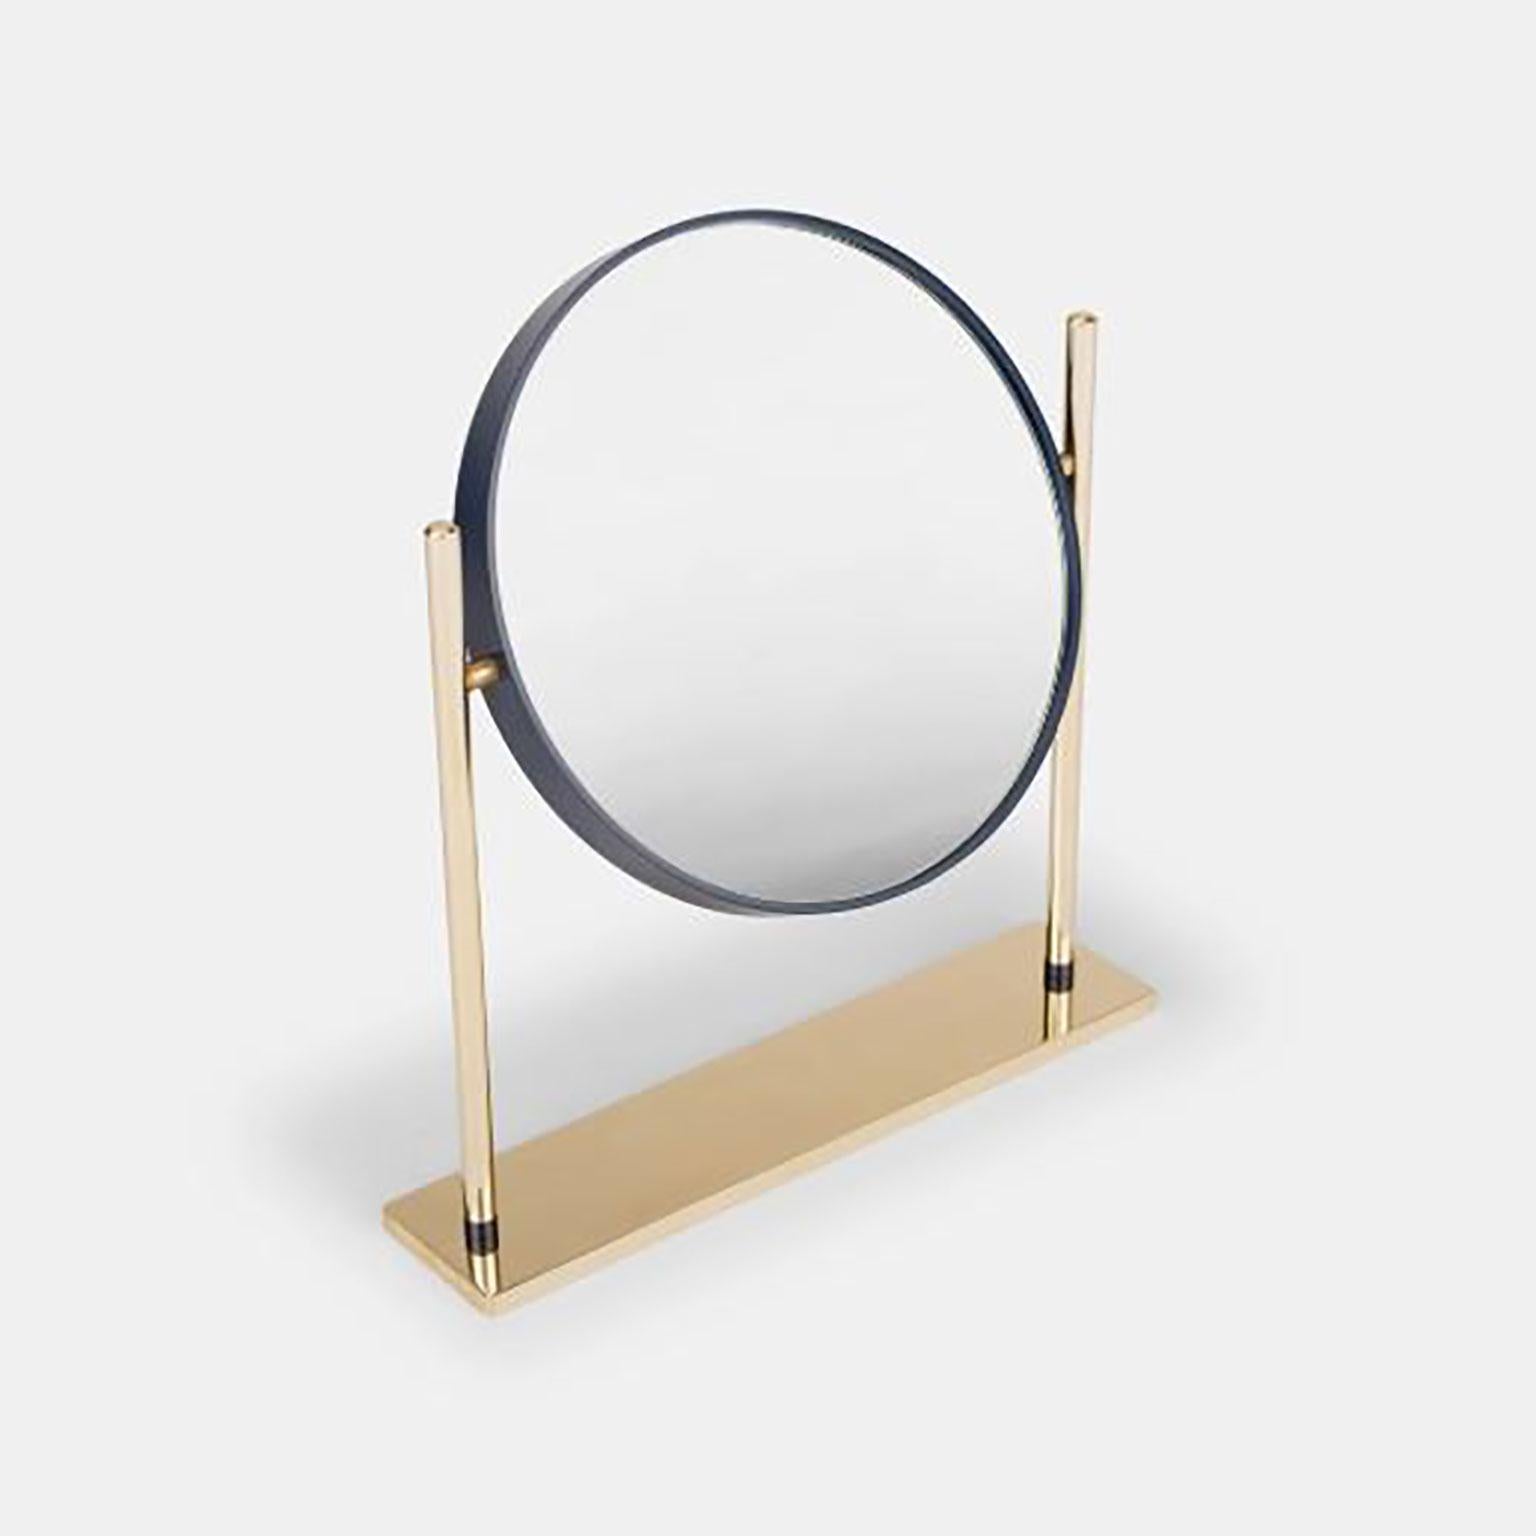 Mirro designed by Federica Biasi for Mingardo. Mirrò is a small desktop and bathroom mirror, a refined object that reveals its integrity through its dimensions and the color of the band that outlines the mirror. It is both simple and serious in the